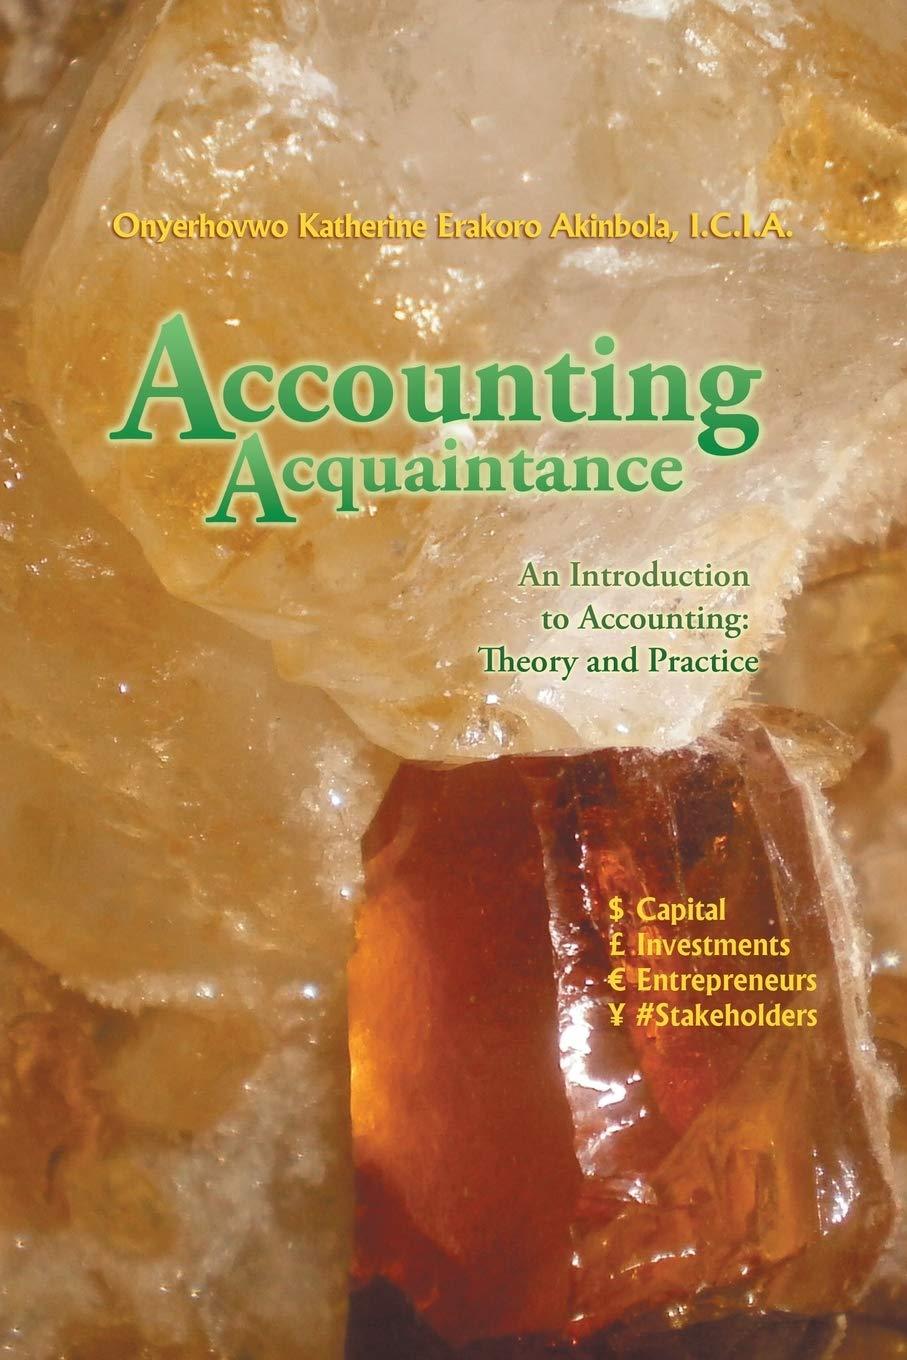 accounting acquaintance an introduction to accounting theory and practice 1st edition onyerhovwo katherine